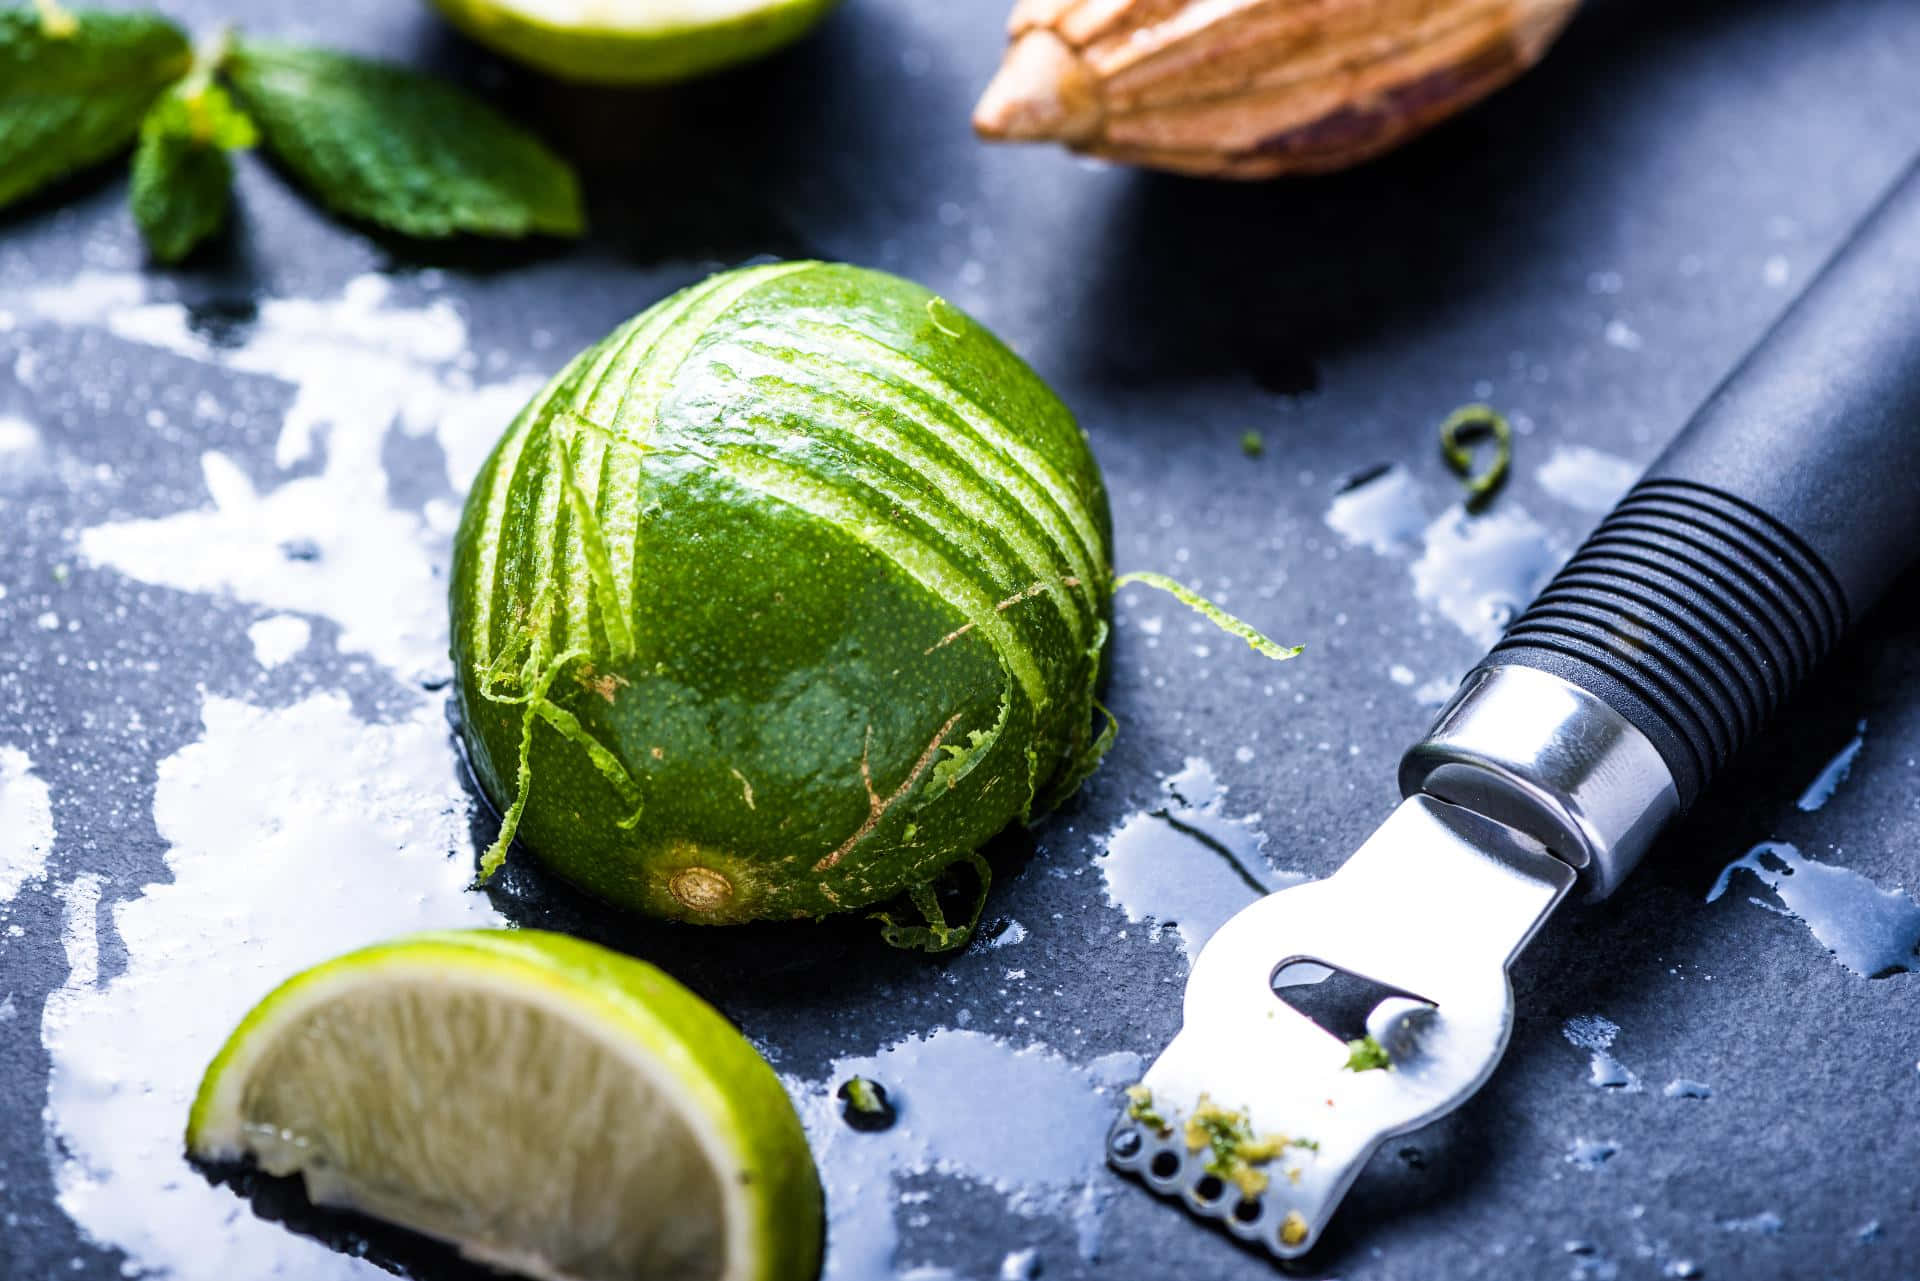 Refreshing lime slices to help beat the summer heat